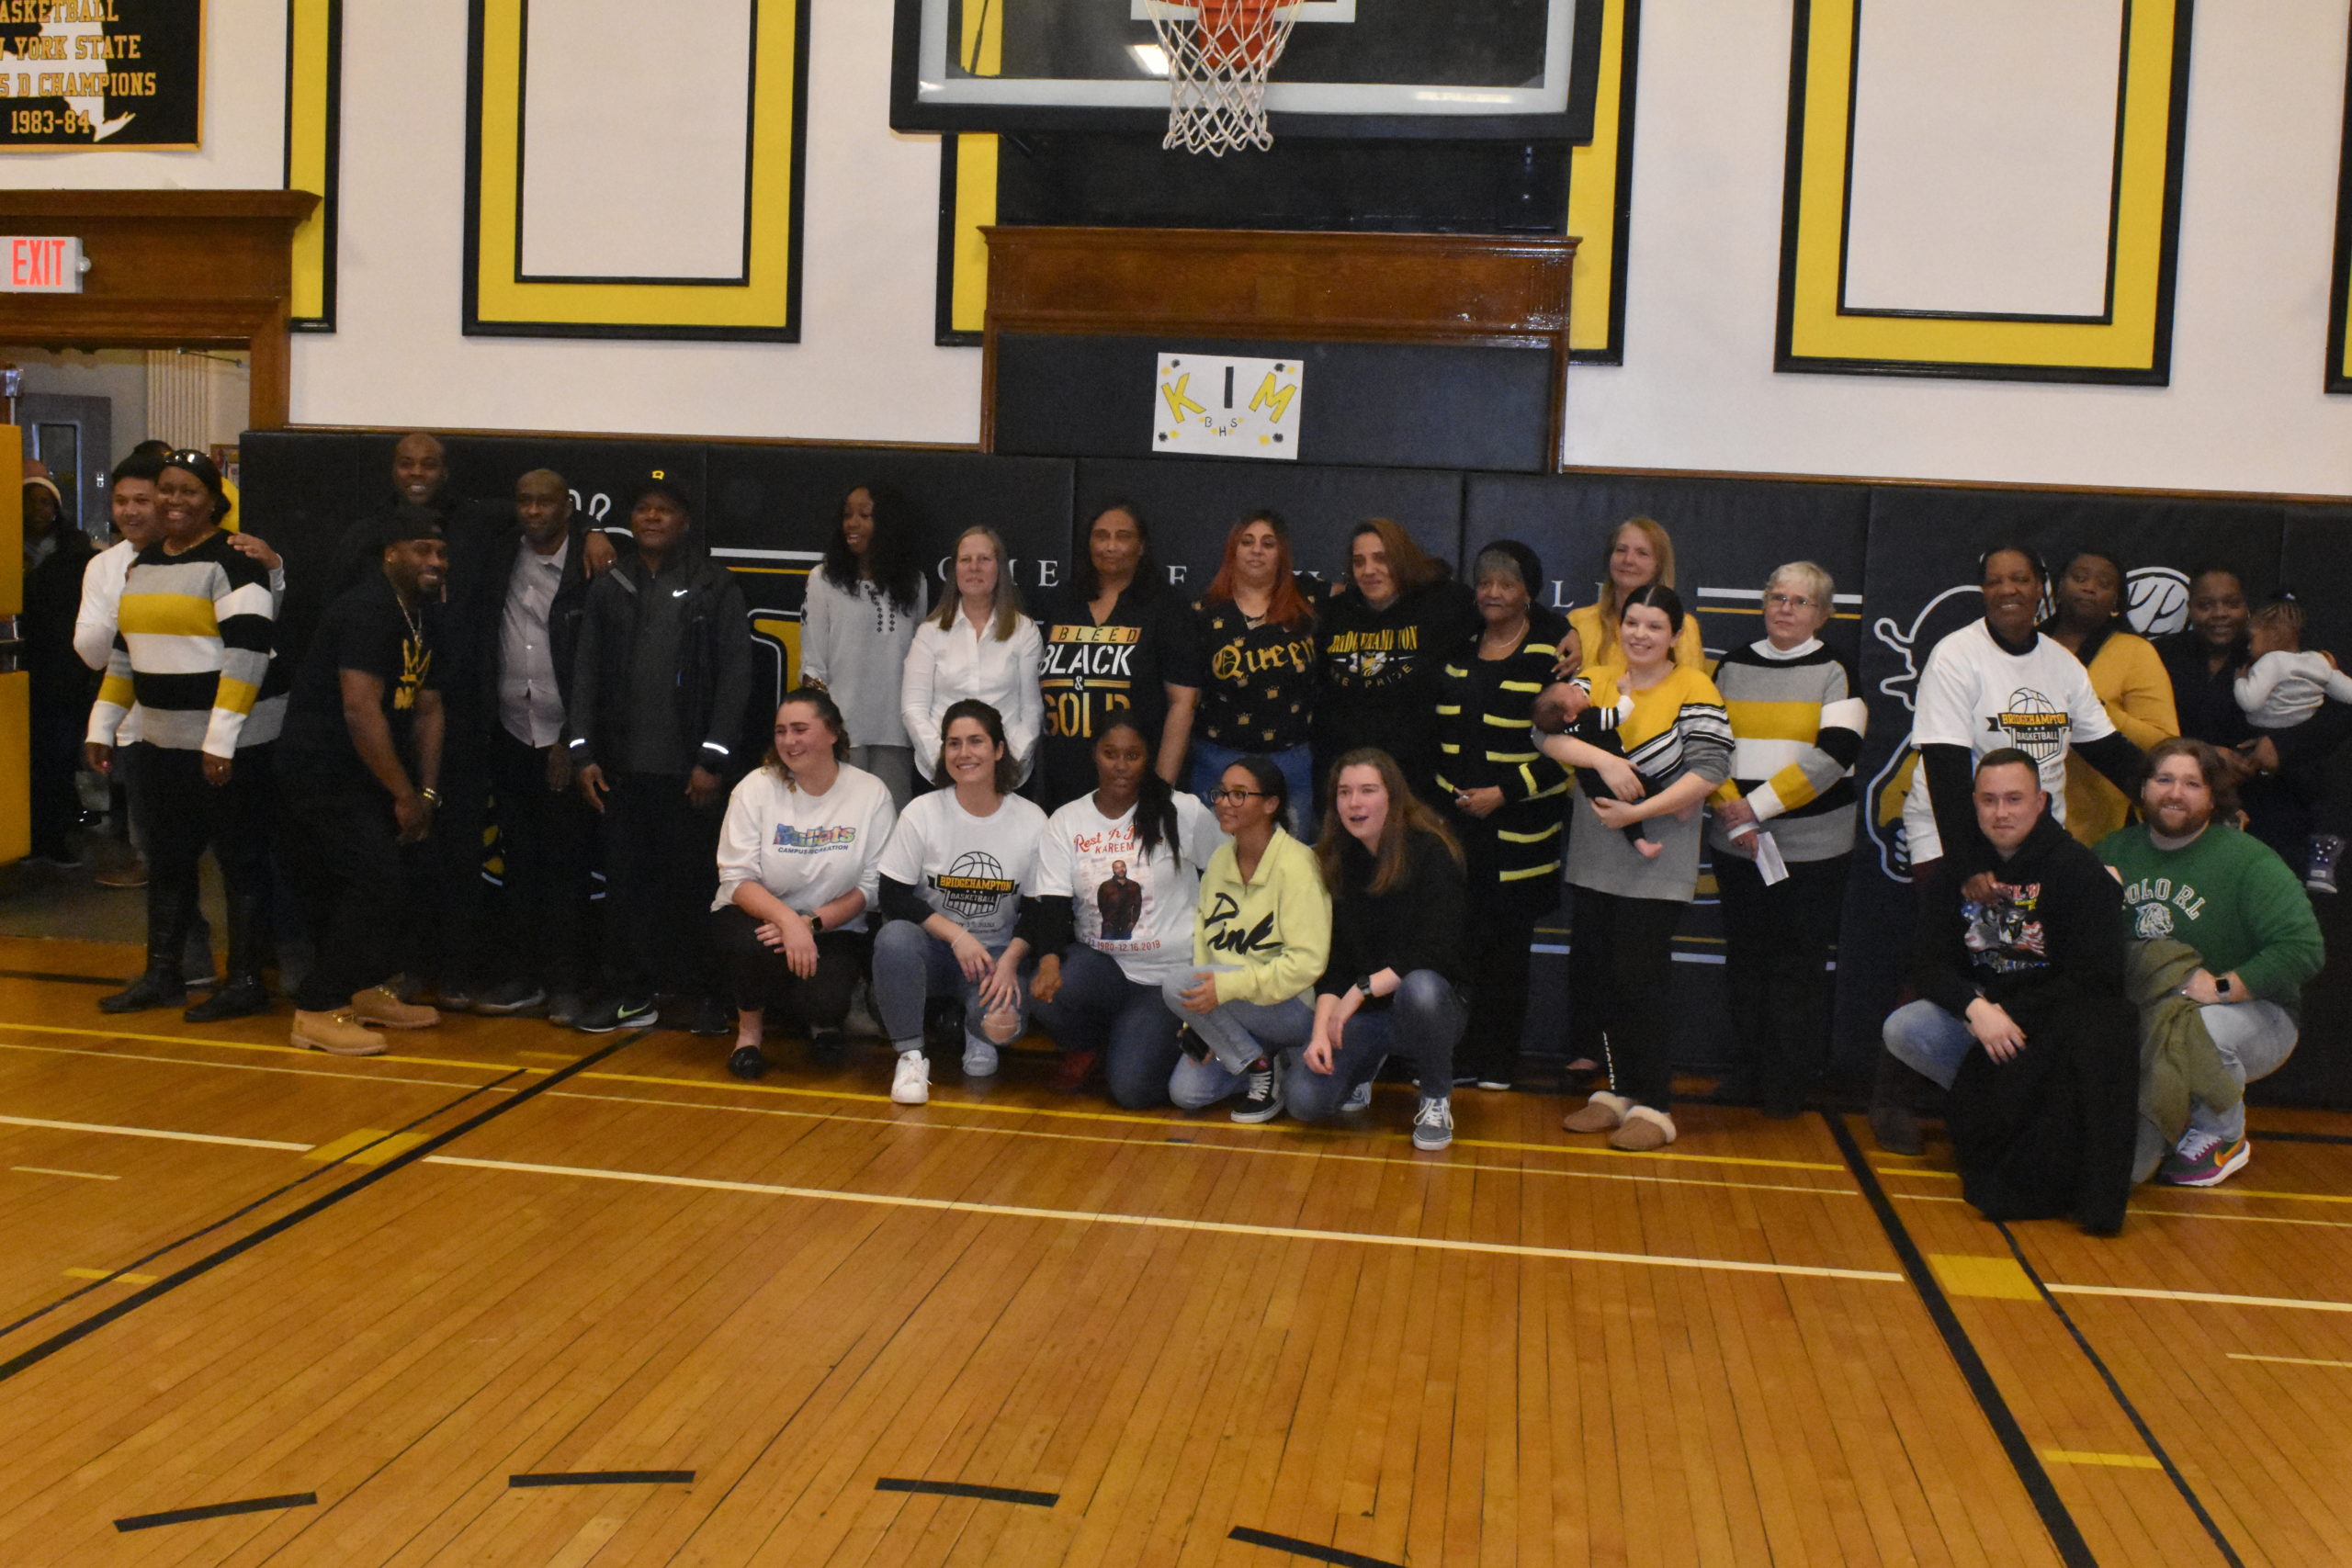 Many Bridgehampton alumni showed up to help close out The Hive on February 5.